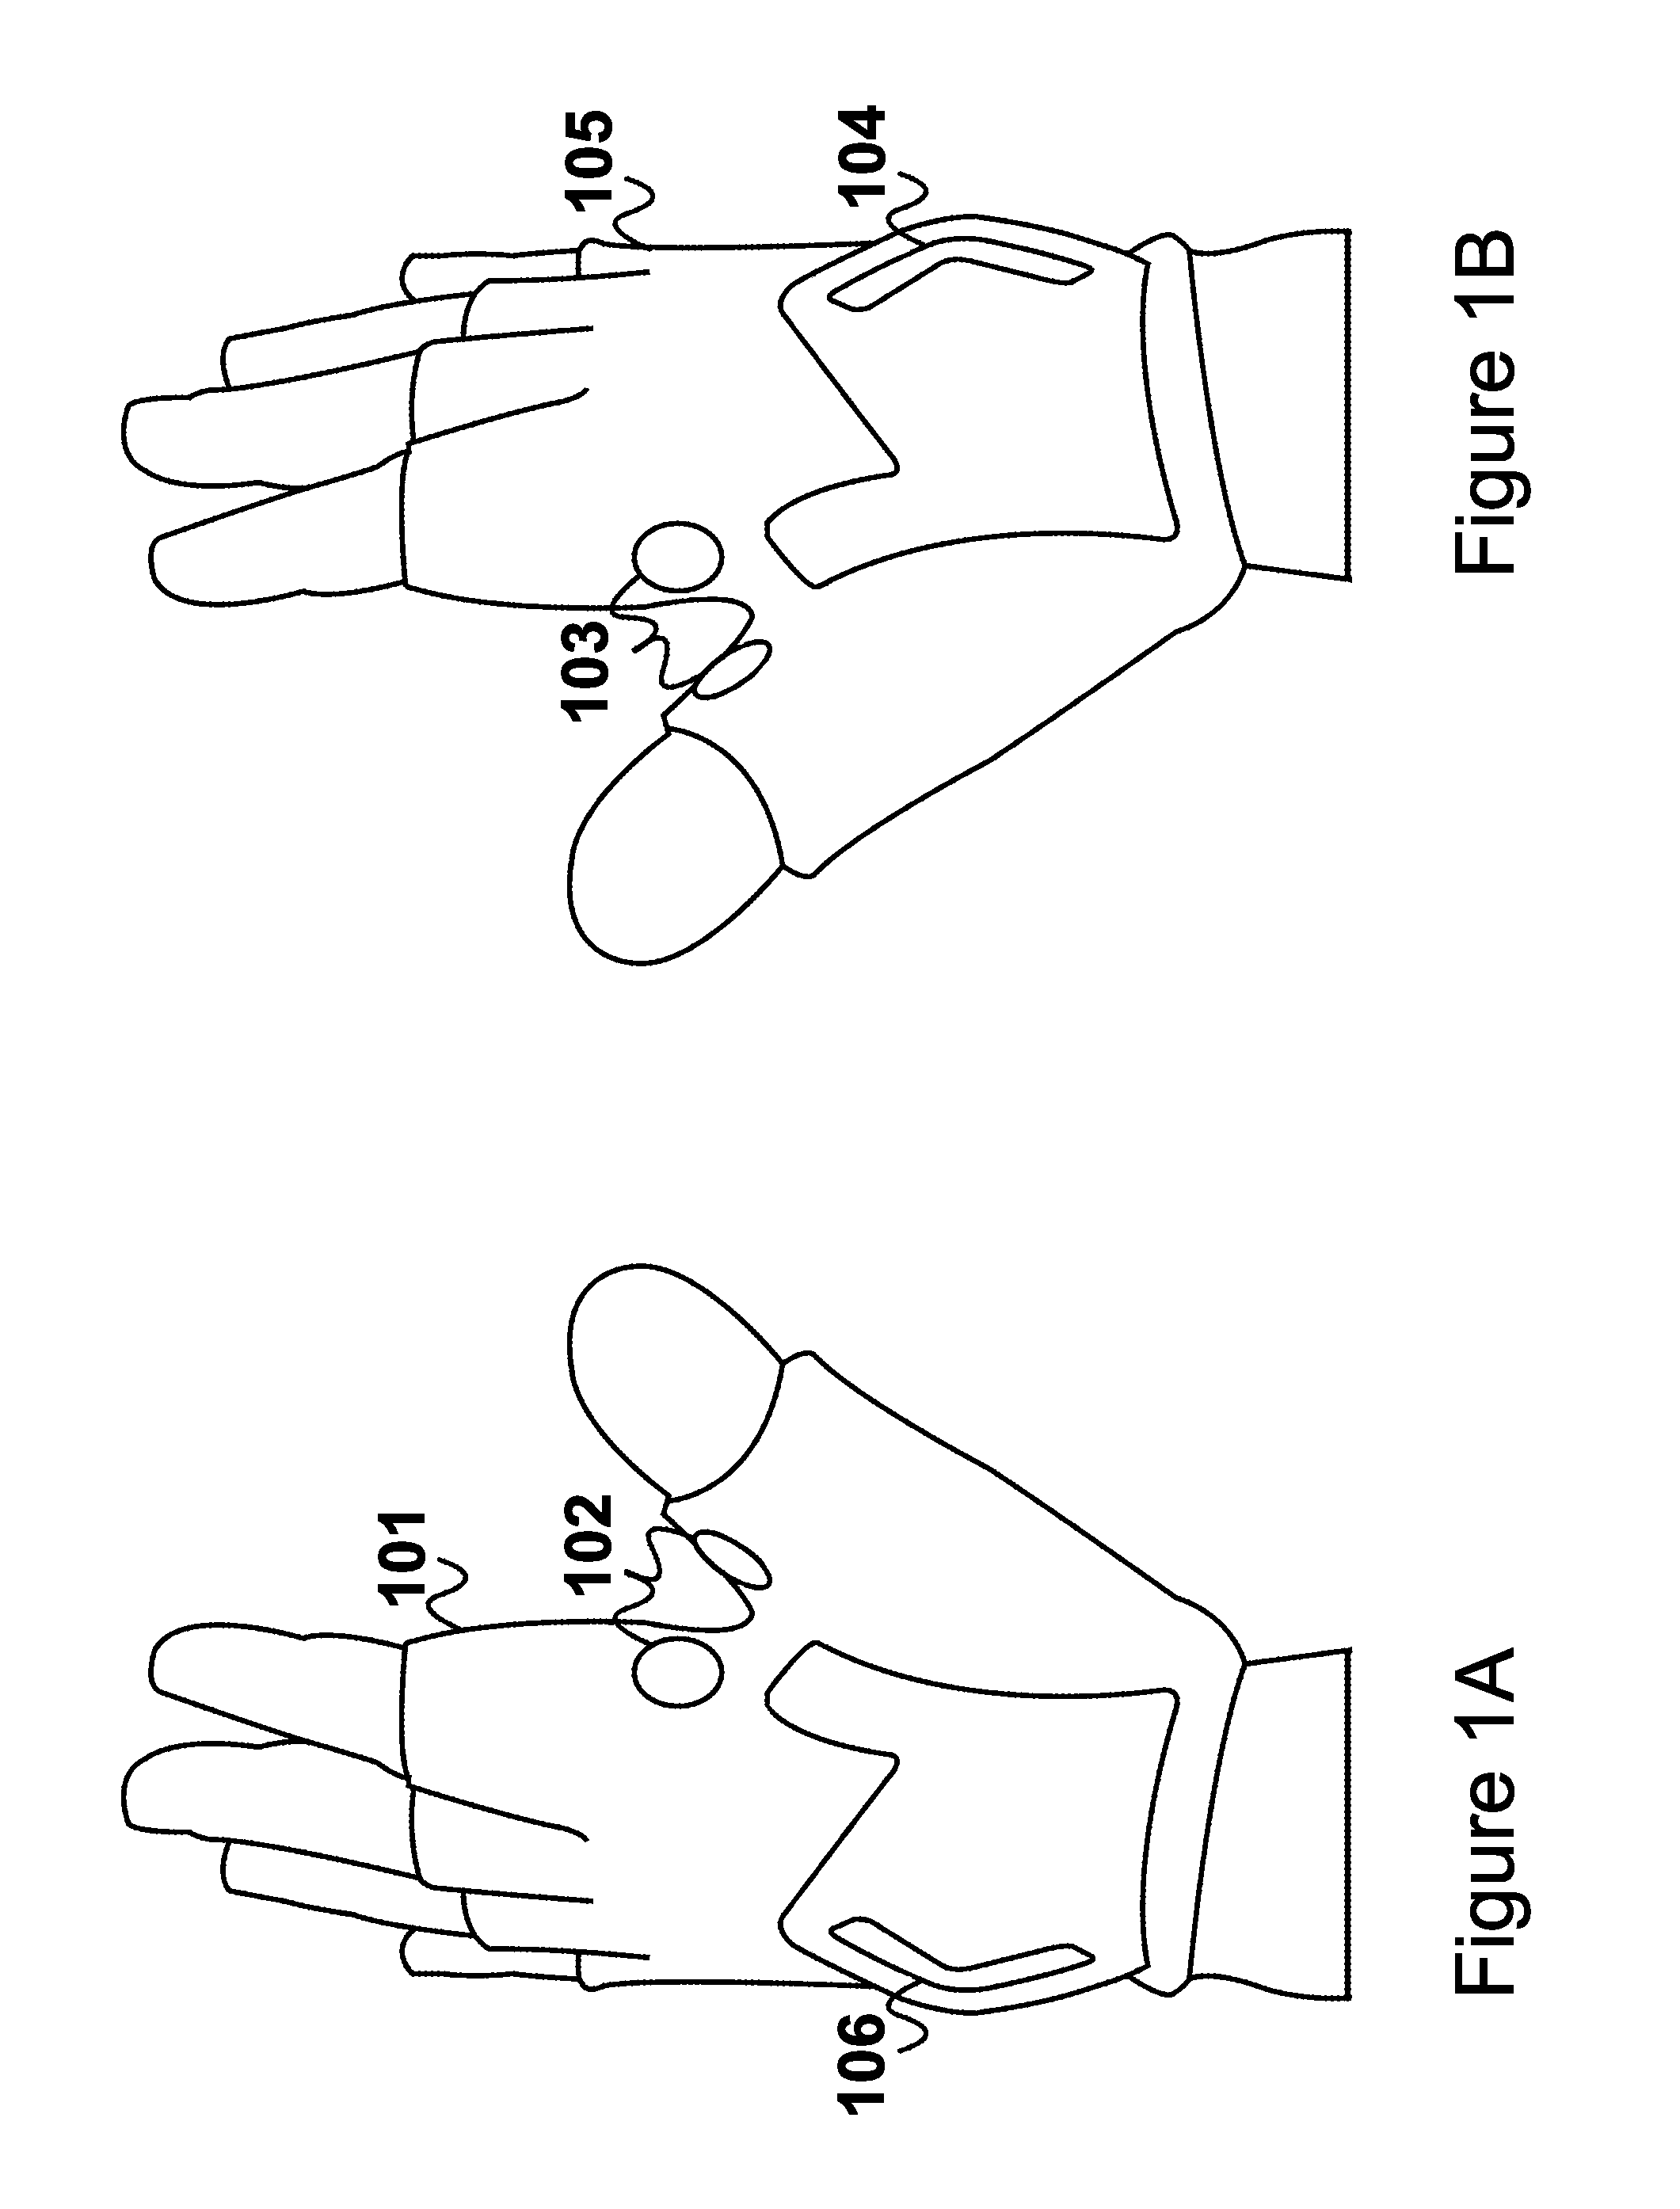 Wearable Electronic Signaling Devices